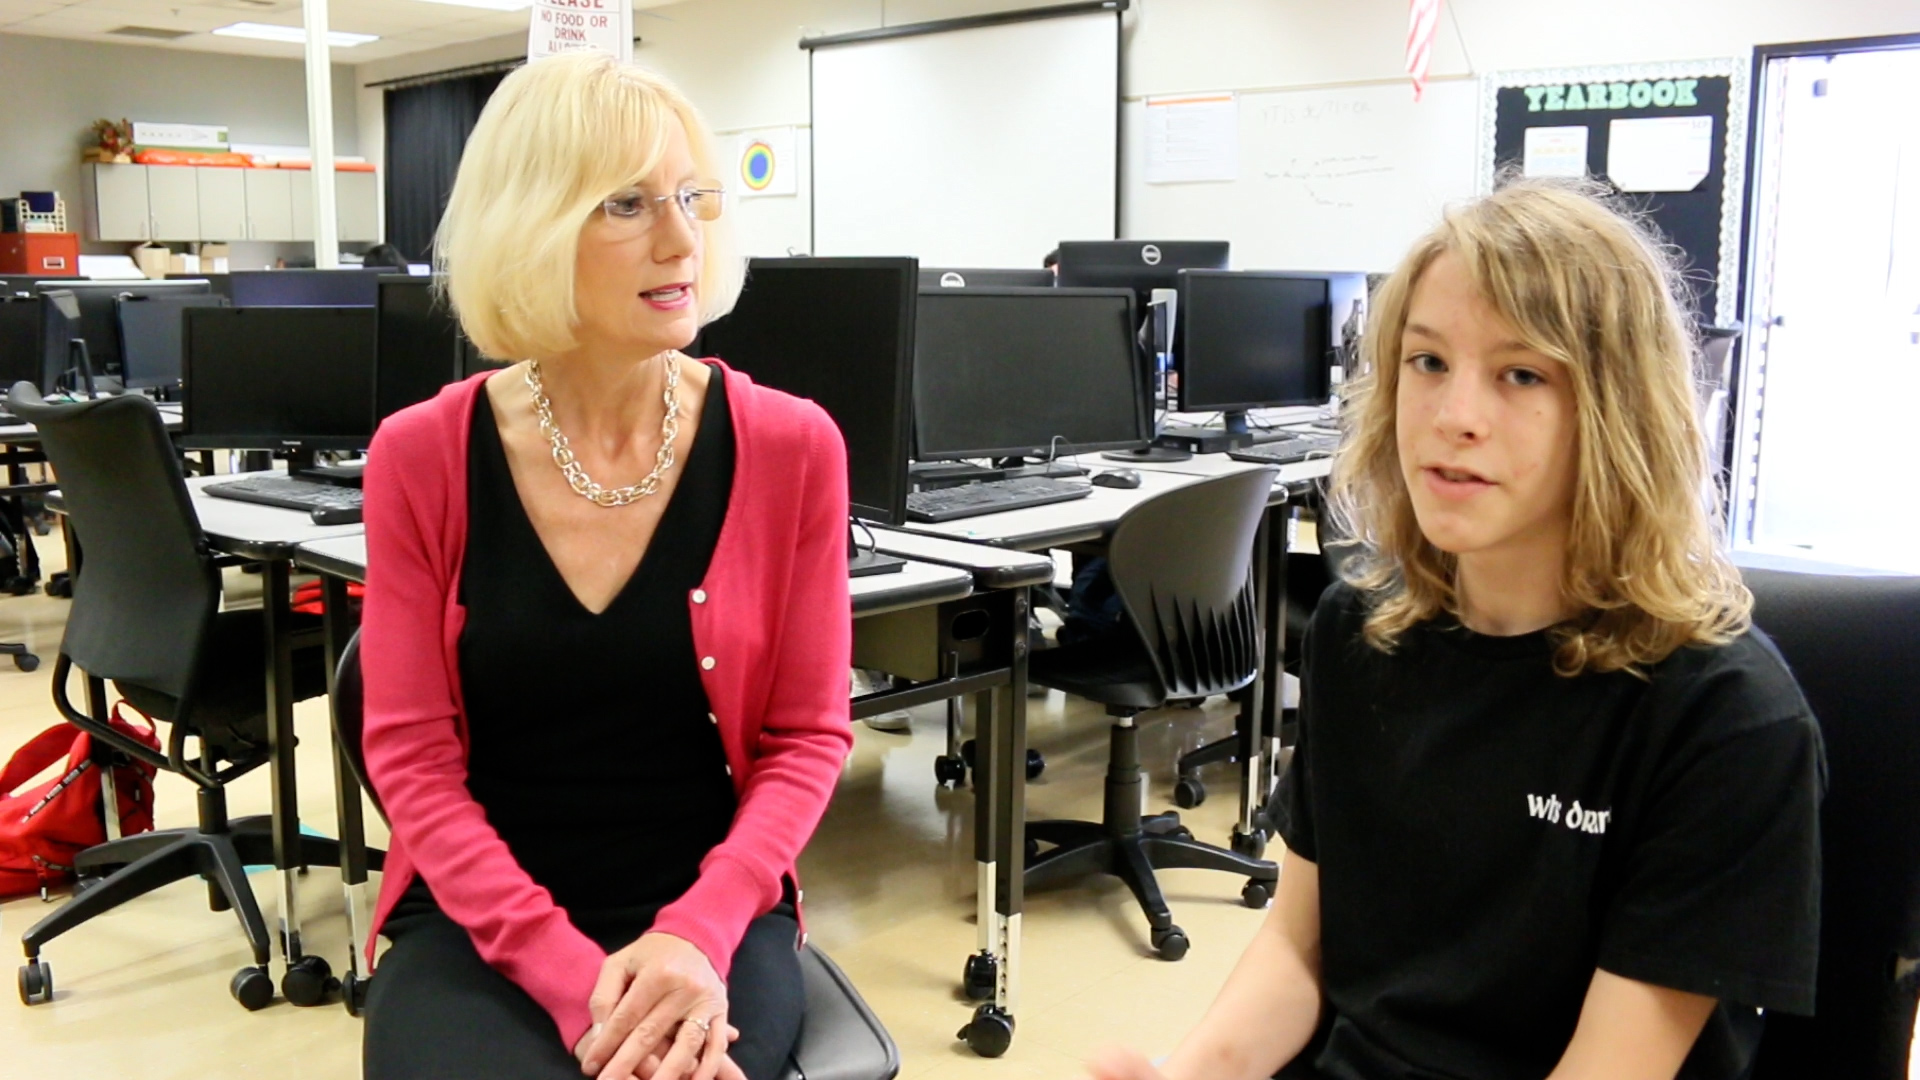 Superintendent Mary Templeton sits with high school student Raphael indoors with computer monitors on desks in the background.